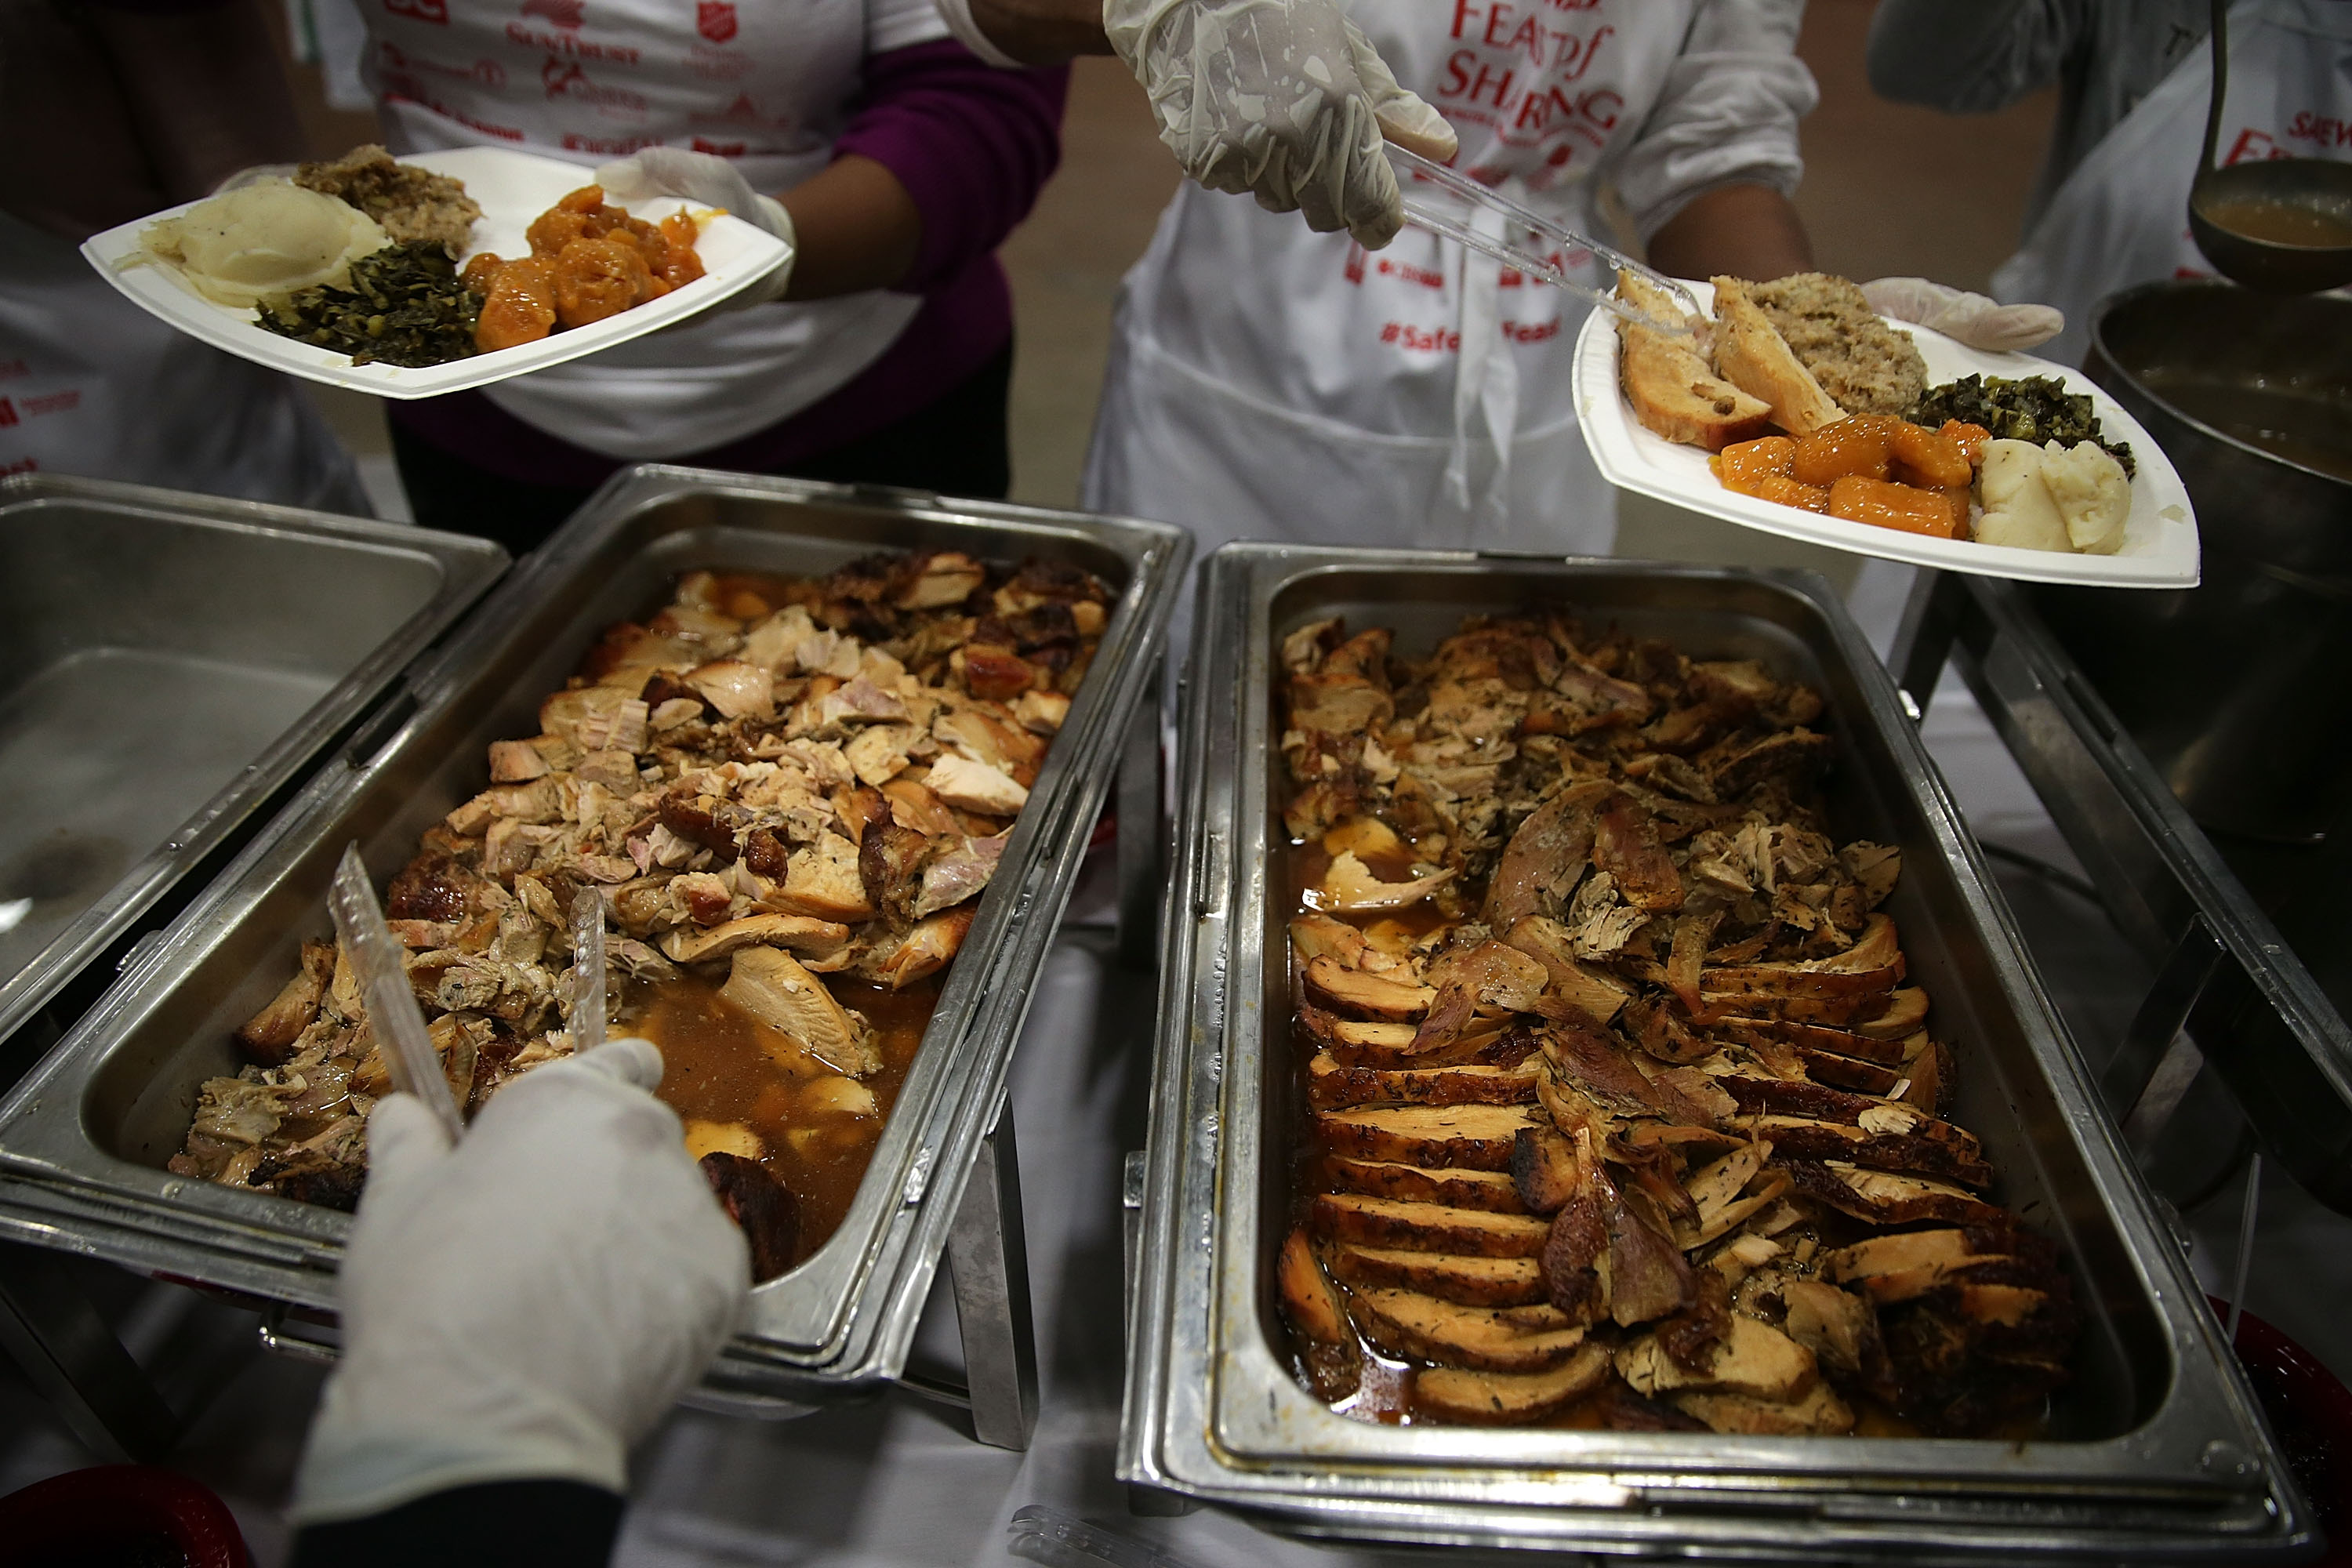 The Difference Between Food Banks Soup Kitchens Food Pantries And How You Can Help At Each